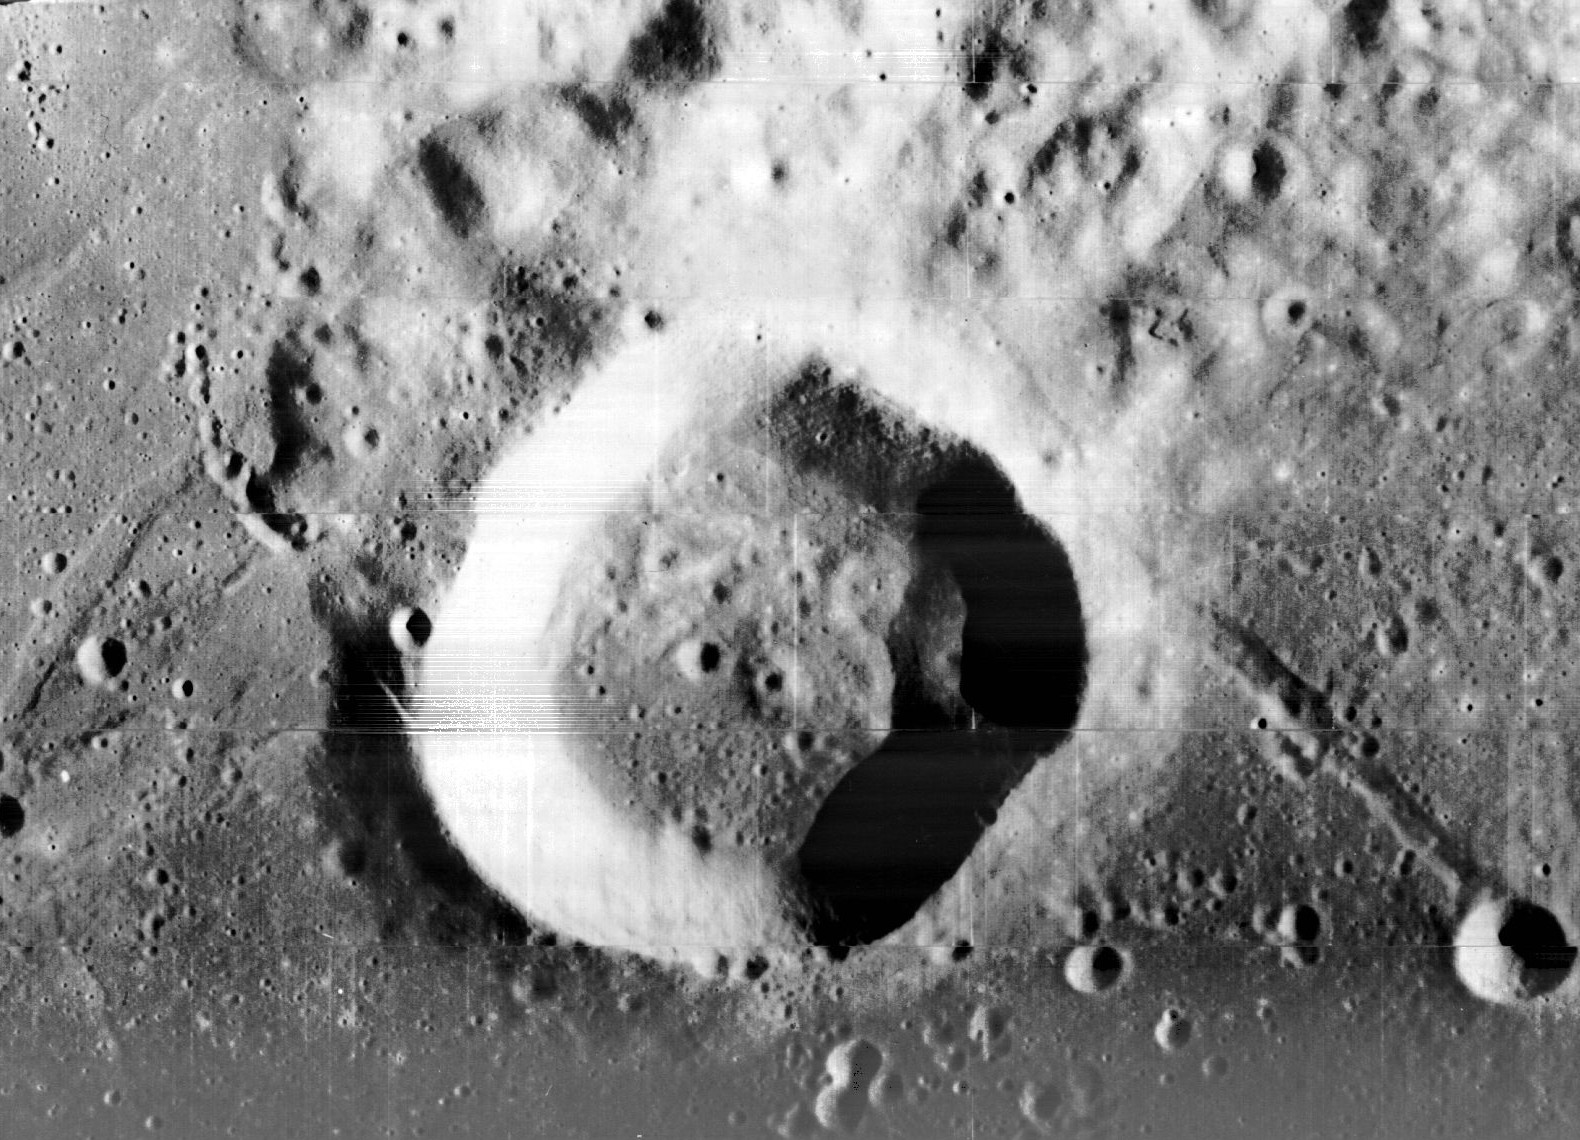 Lunar crater on the moon. (Wiki).